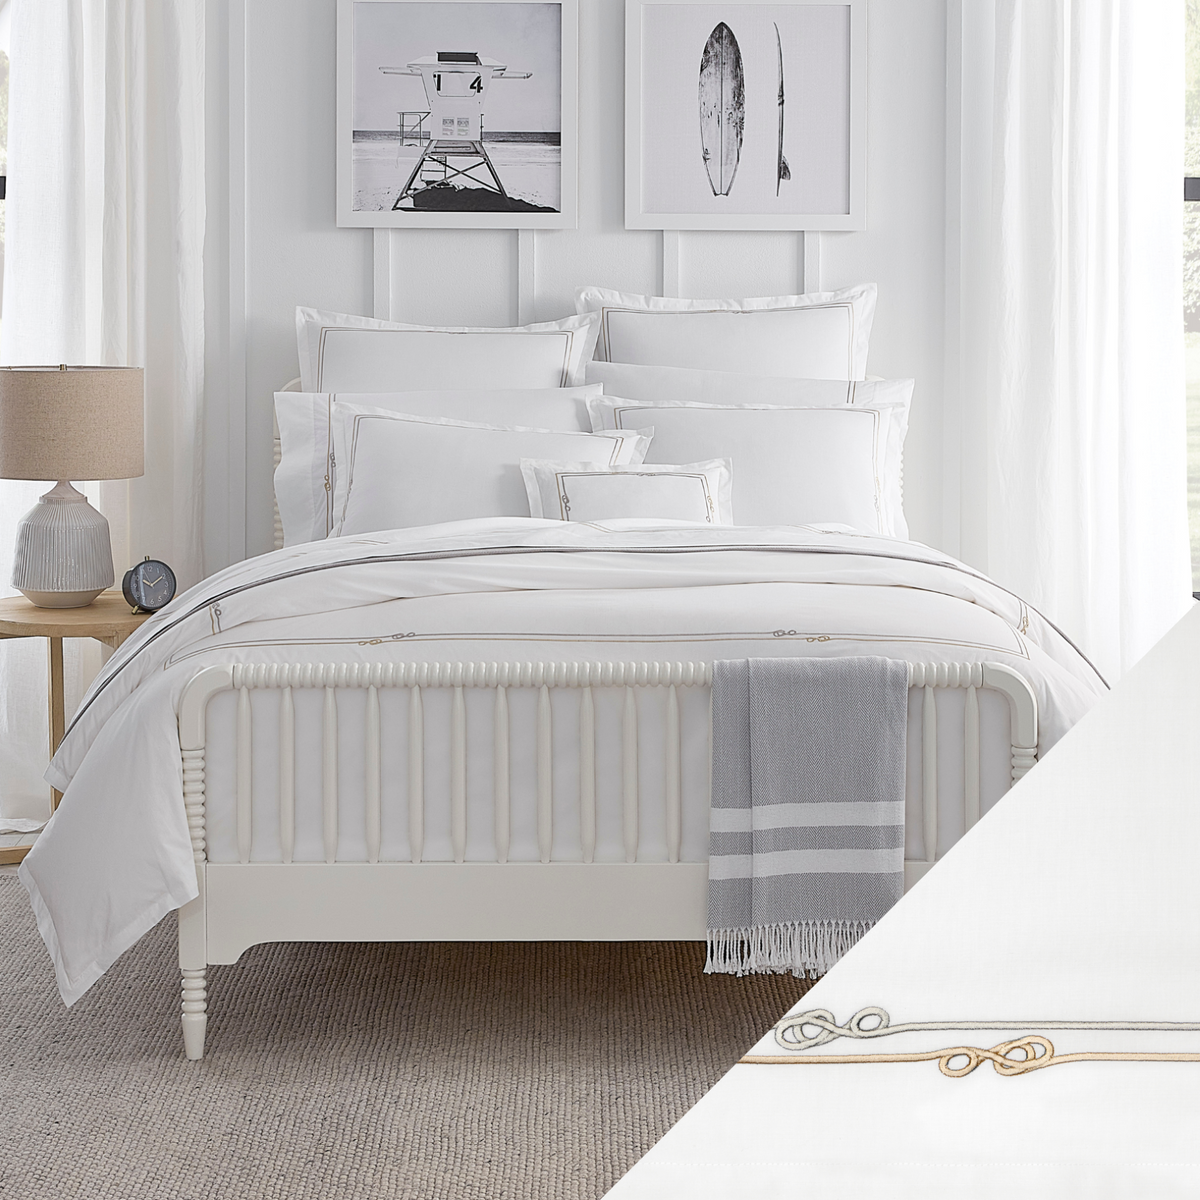 Full Lifestyle Image of Sferra Squillo Bedding with Swatch of White/Platinum